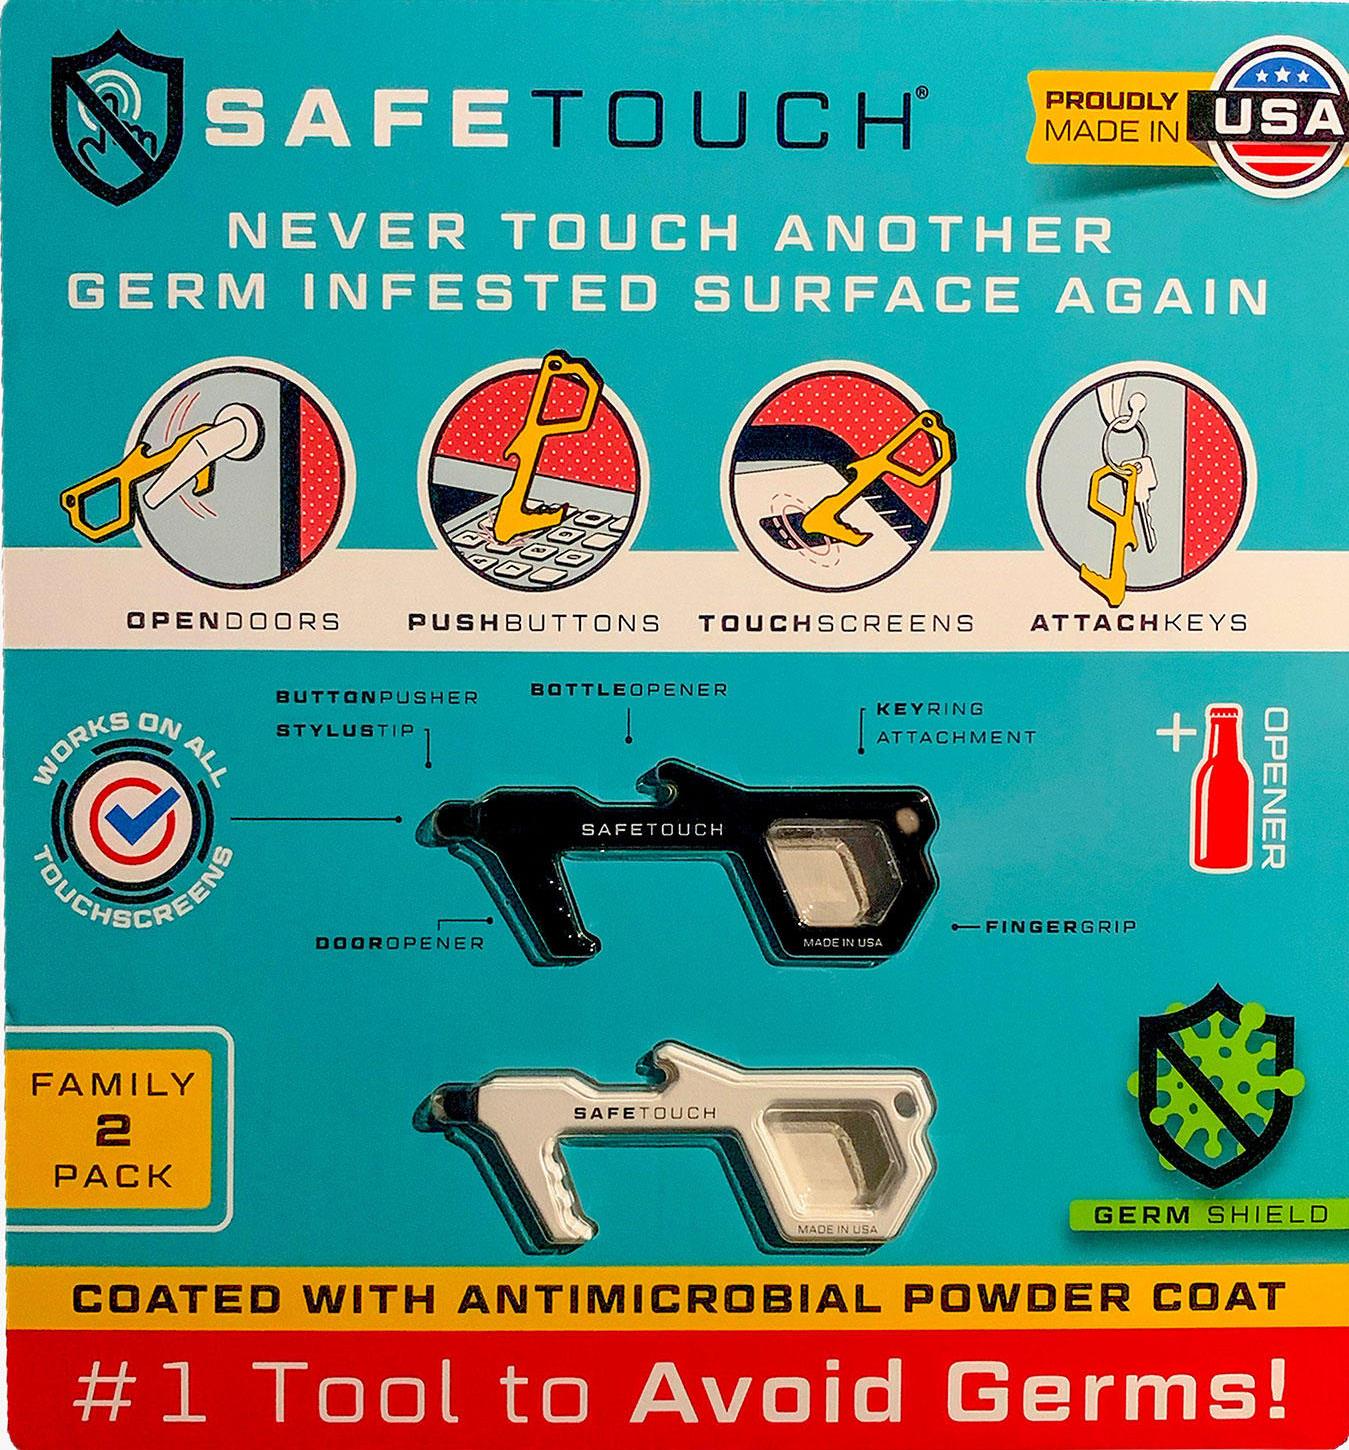 SafeTouch Hygiene Multi-Tool, Works on Touch Screen, Made in USA (2 Pack)